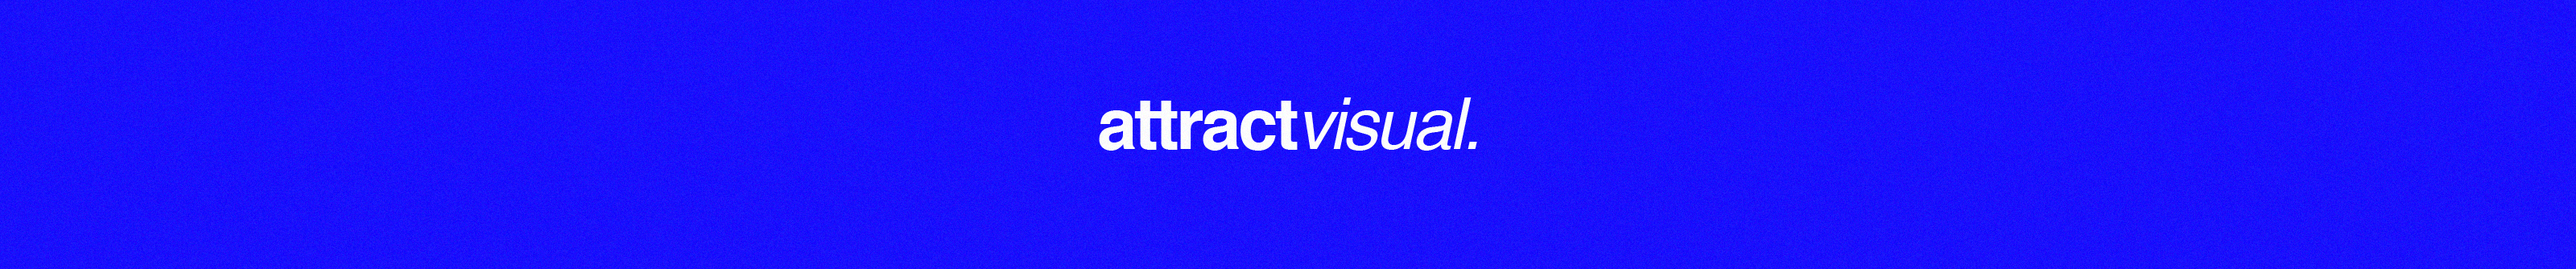 Profilbanneret til Attract visual